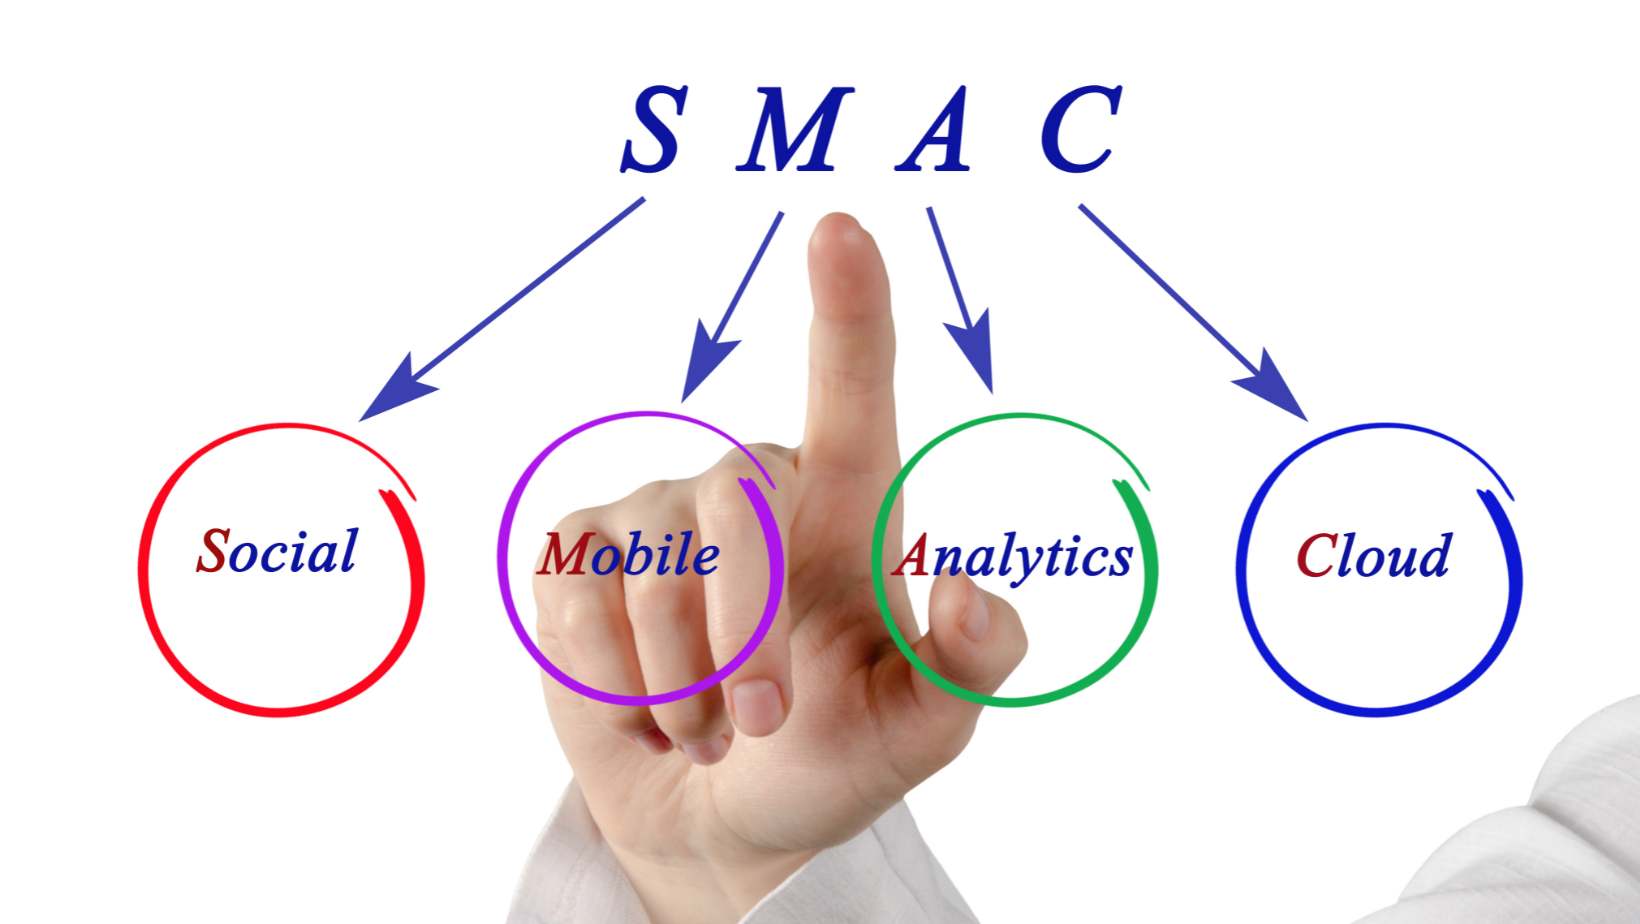 What is Socia Mobile Analytics Cloud